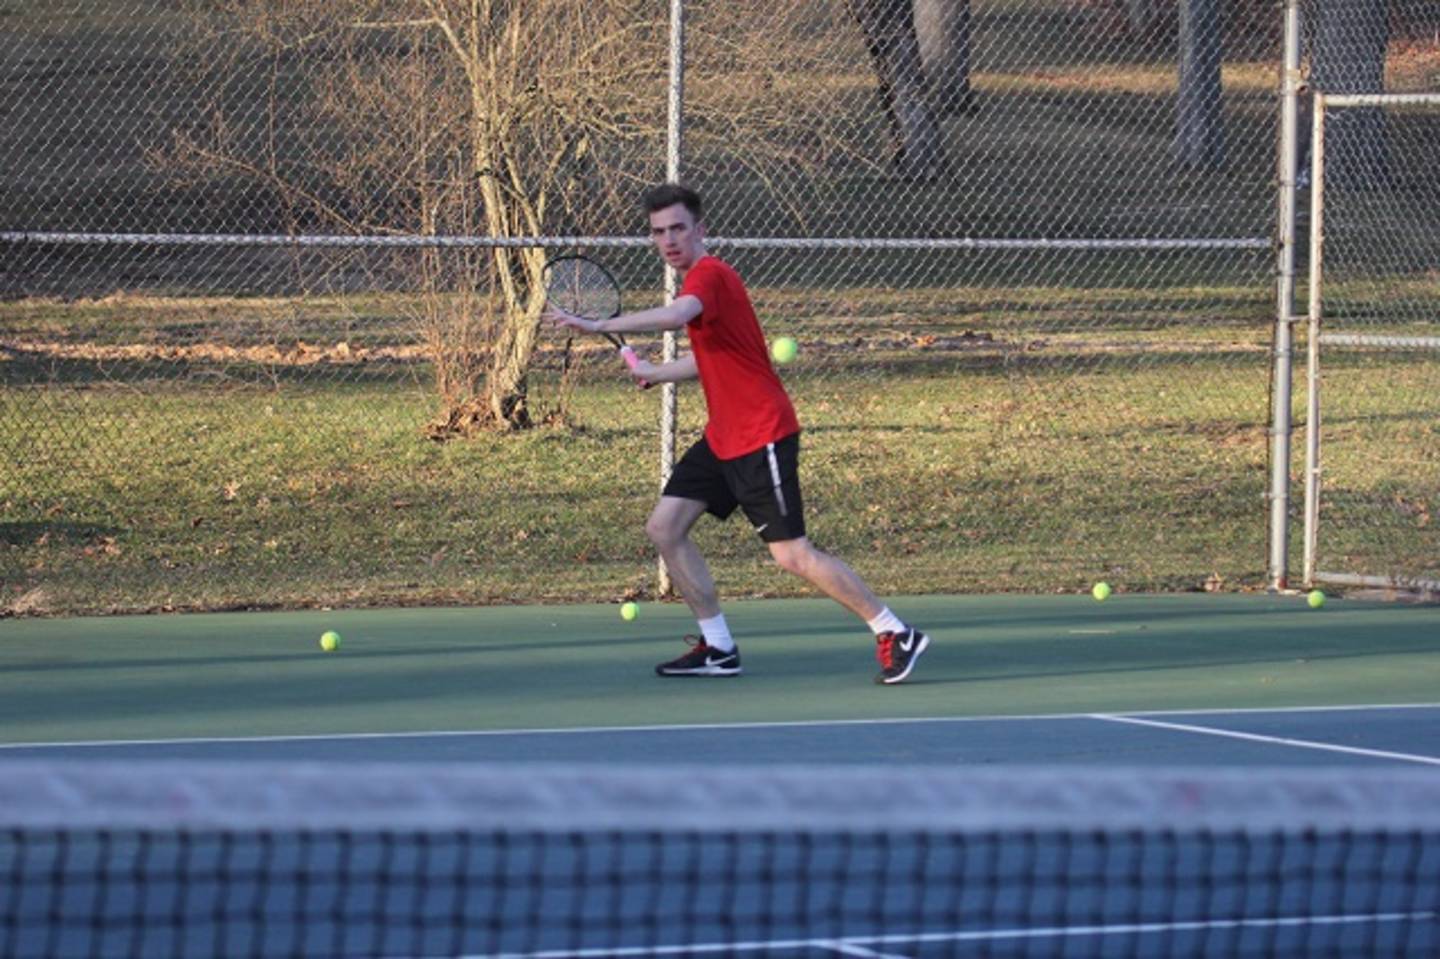 Jack Clifton, deaf tennis player training on court